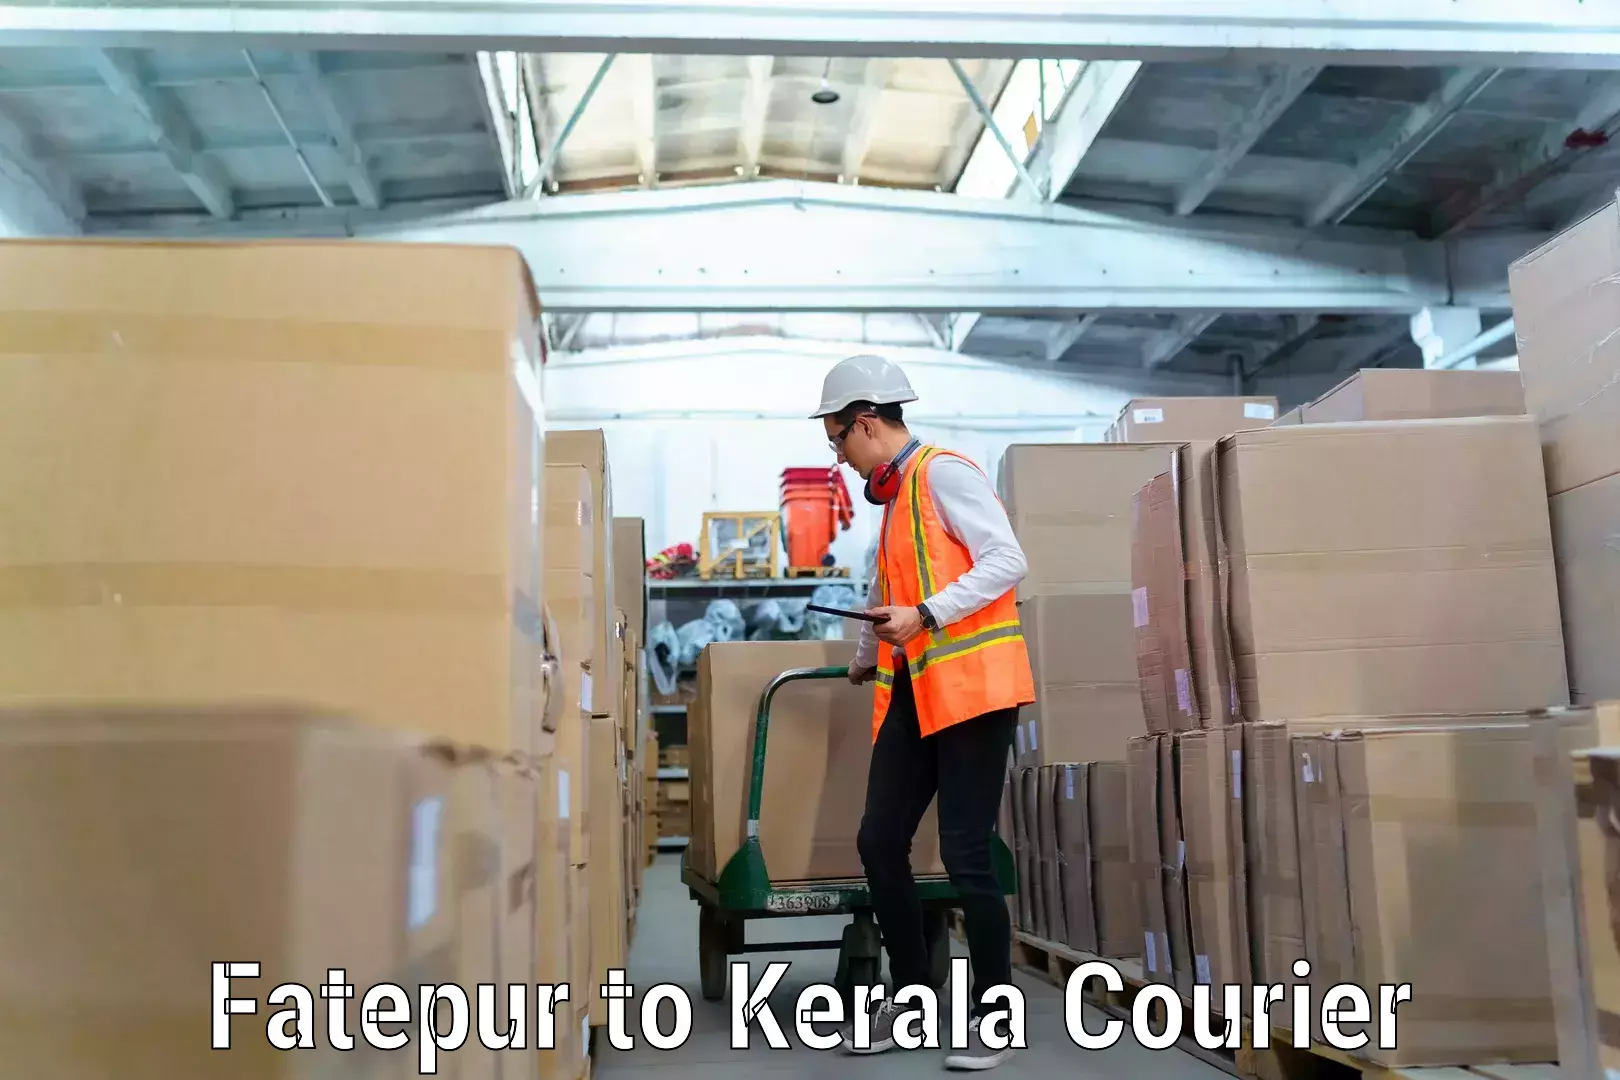 Furniture relocation experts Fatepur to Kerala